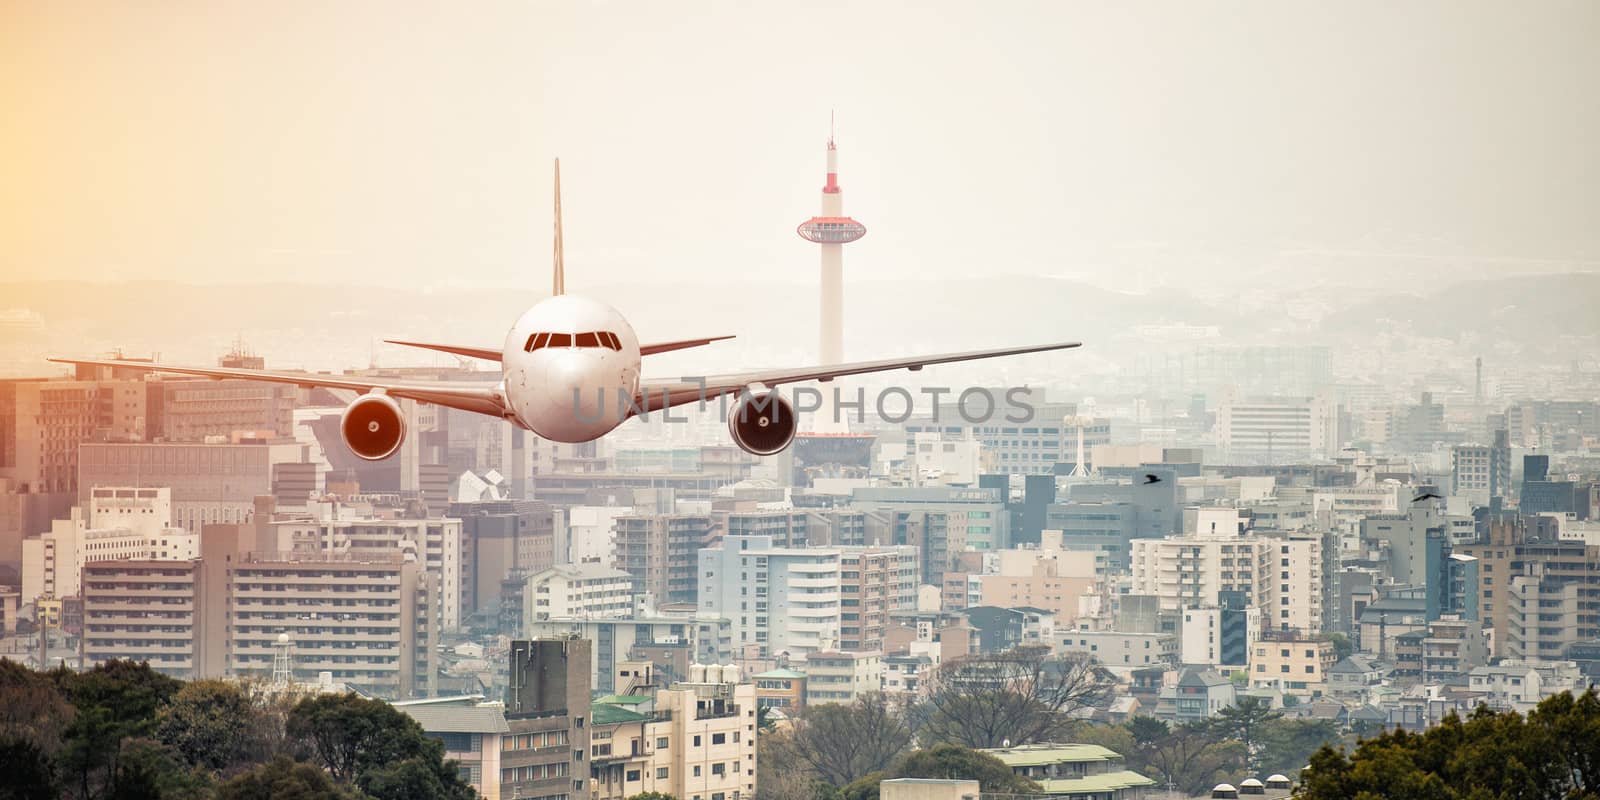 Airplane frying over the kyoto tower background